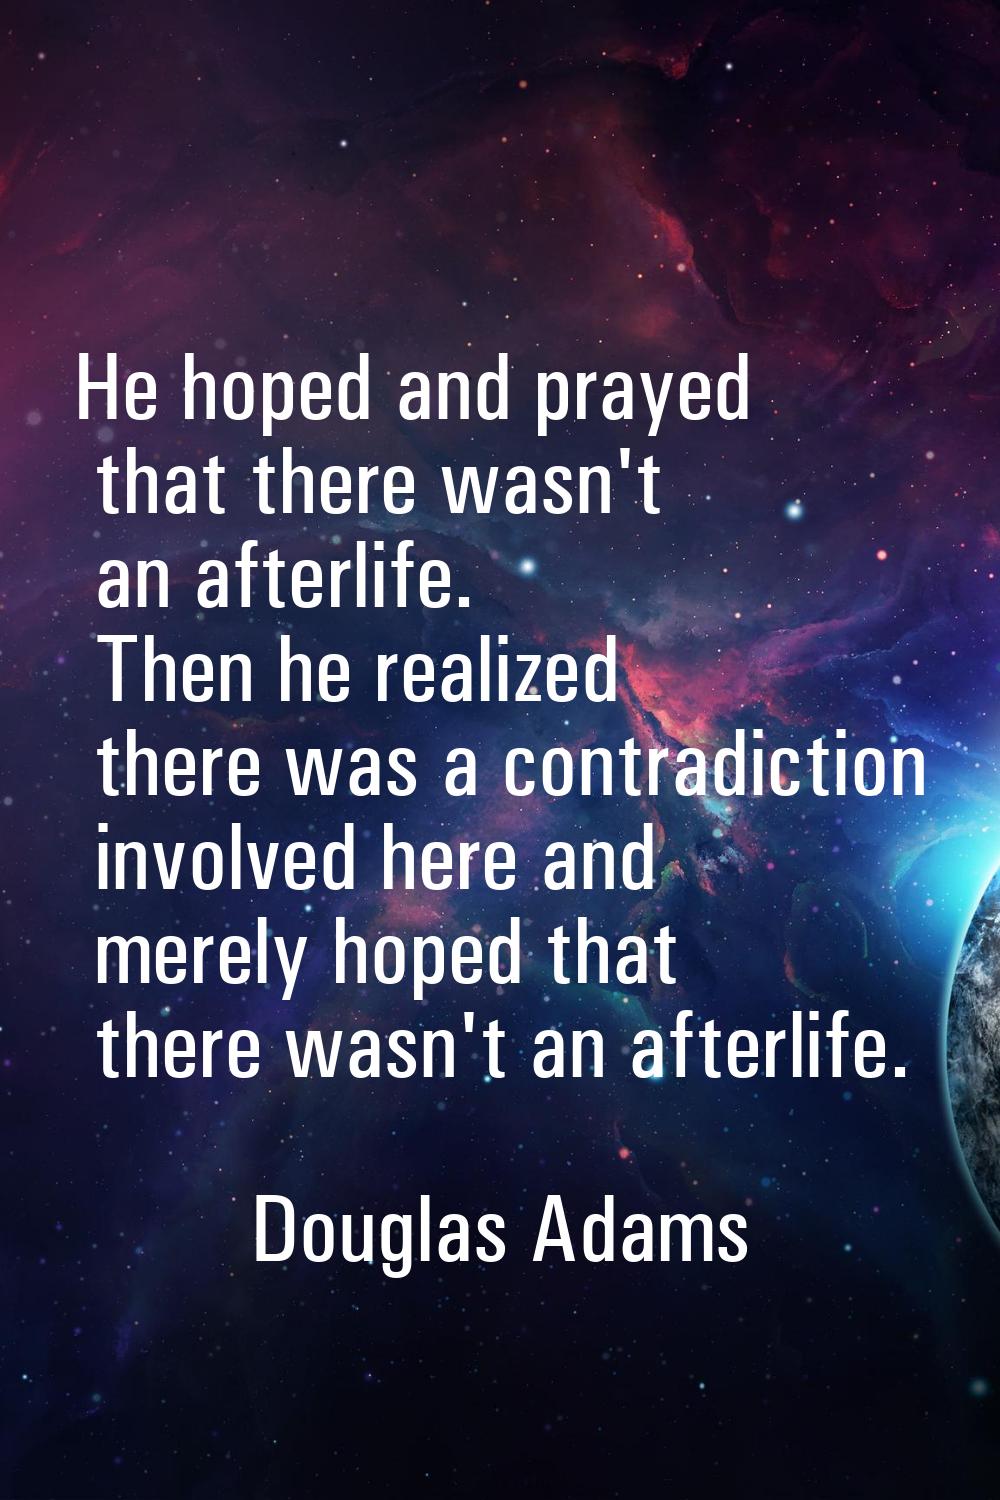 He hoped and prayed that there wasn't an afterlife. Then he realized there was a contradiction invo